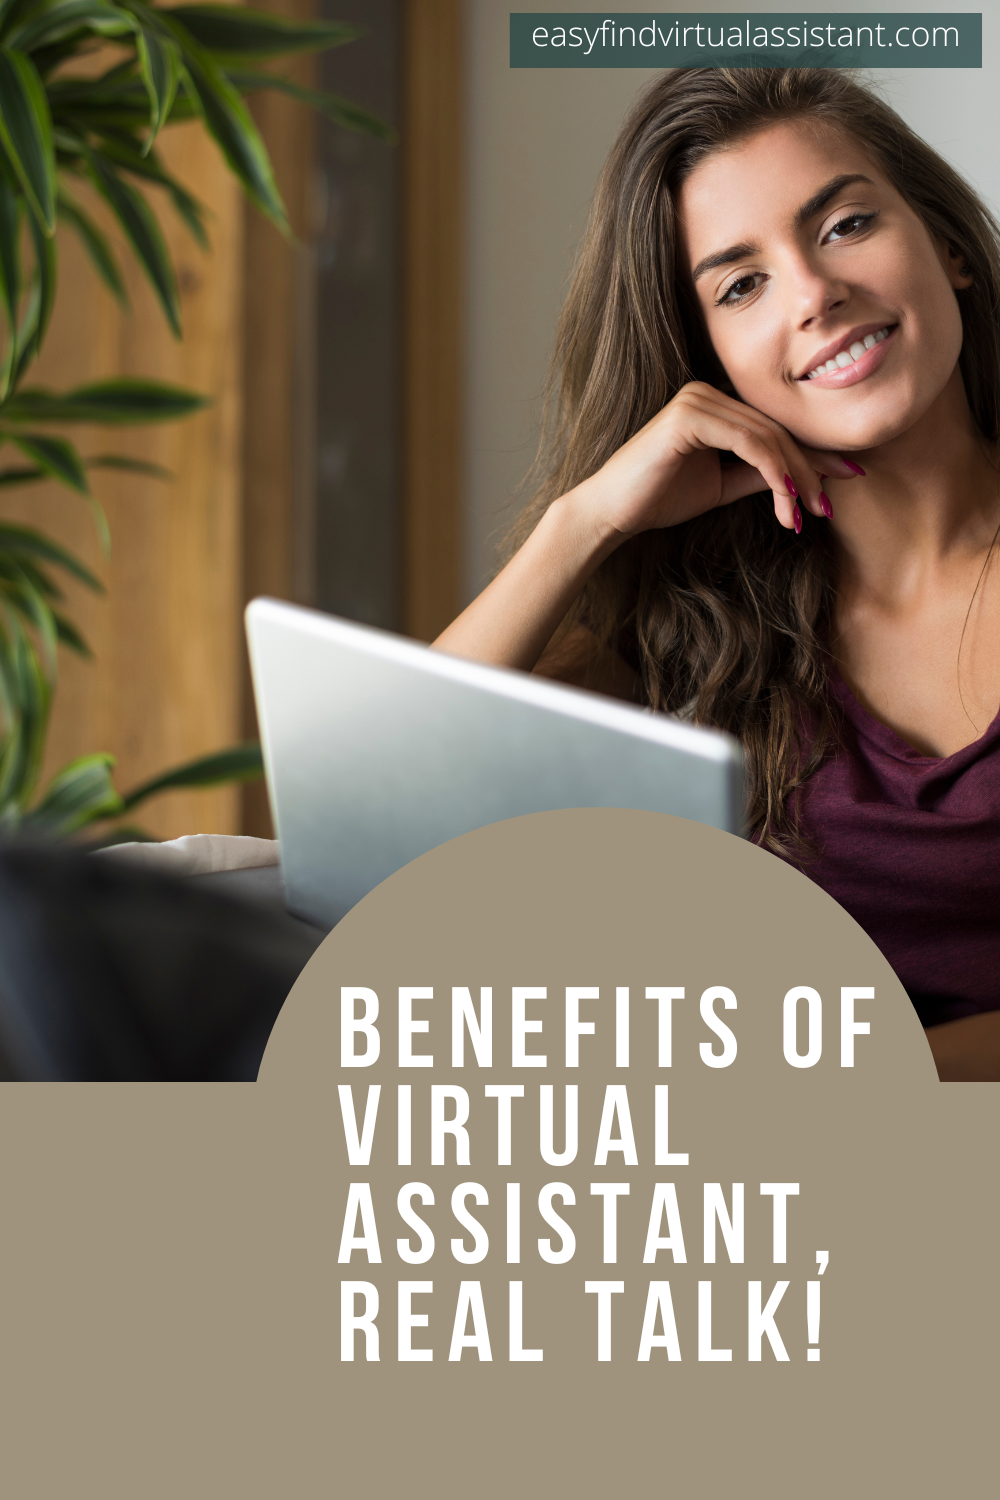 BENEFITS OF VIRTUAL ASSISTANT